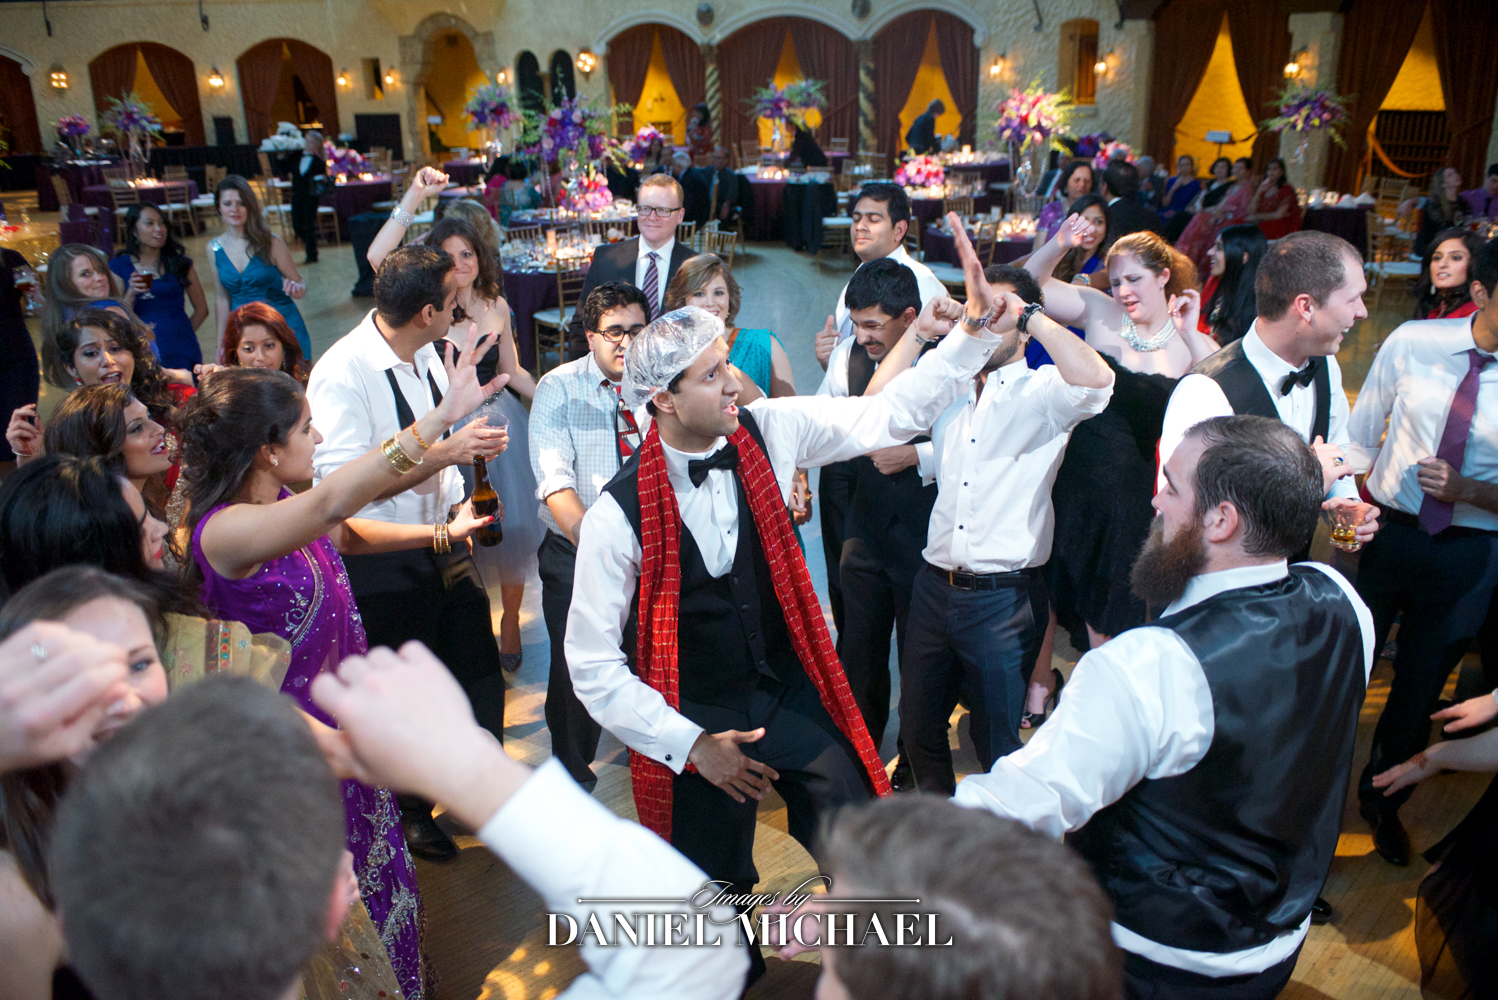 Candid photography by a South Asian wedding photographer during a lively reception